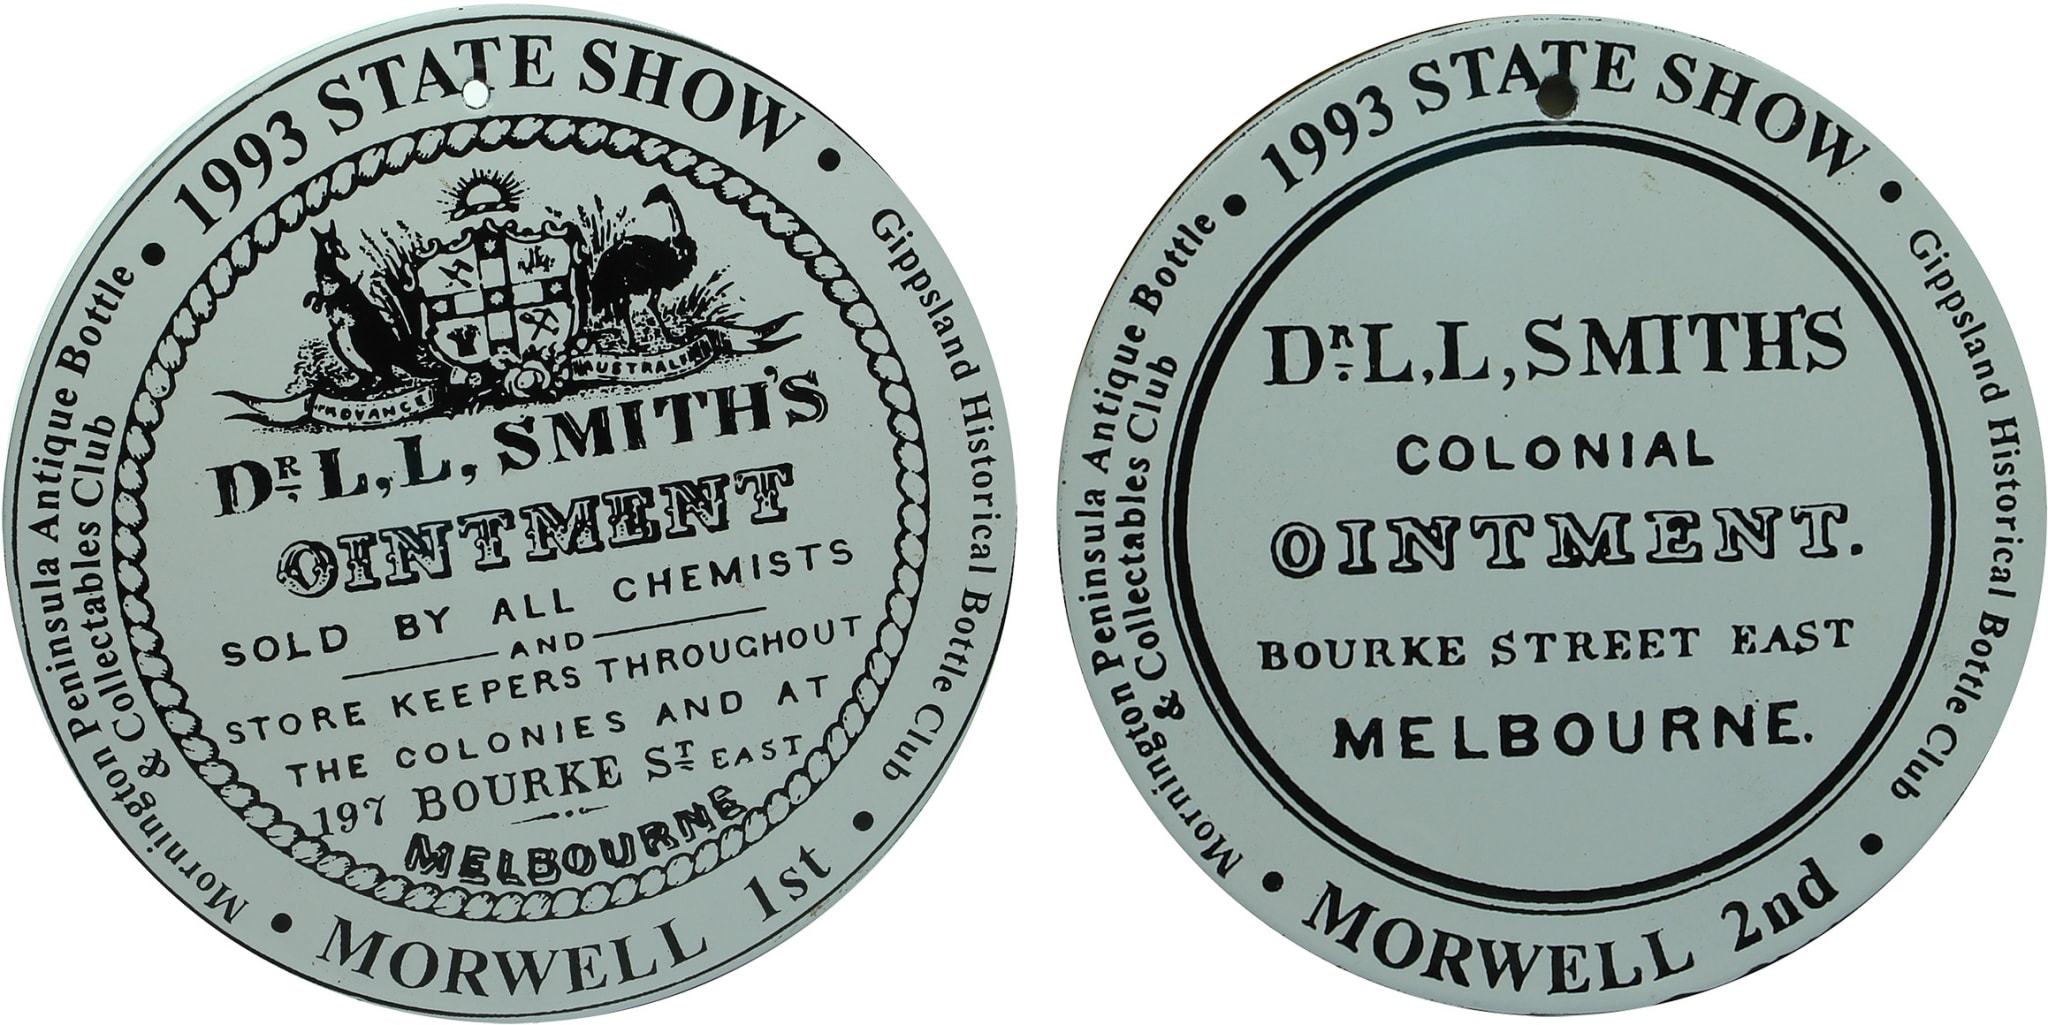 Enamel Signs 1993 Victorian State Bottle Show Morwell